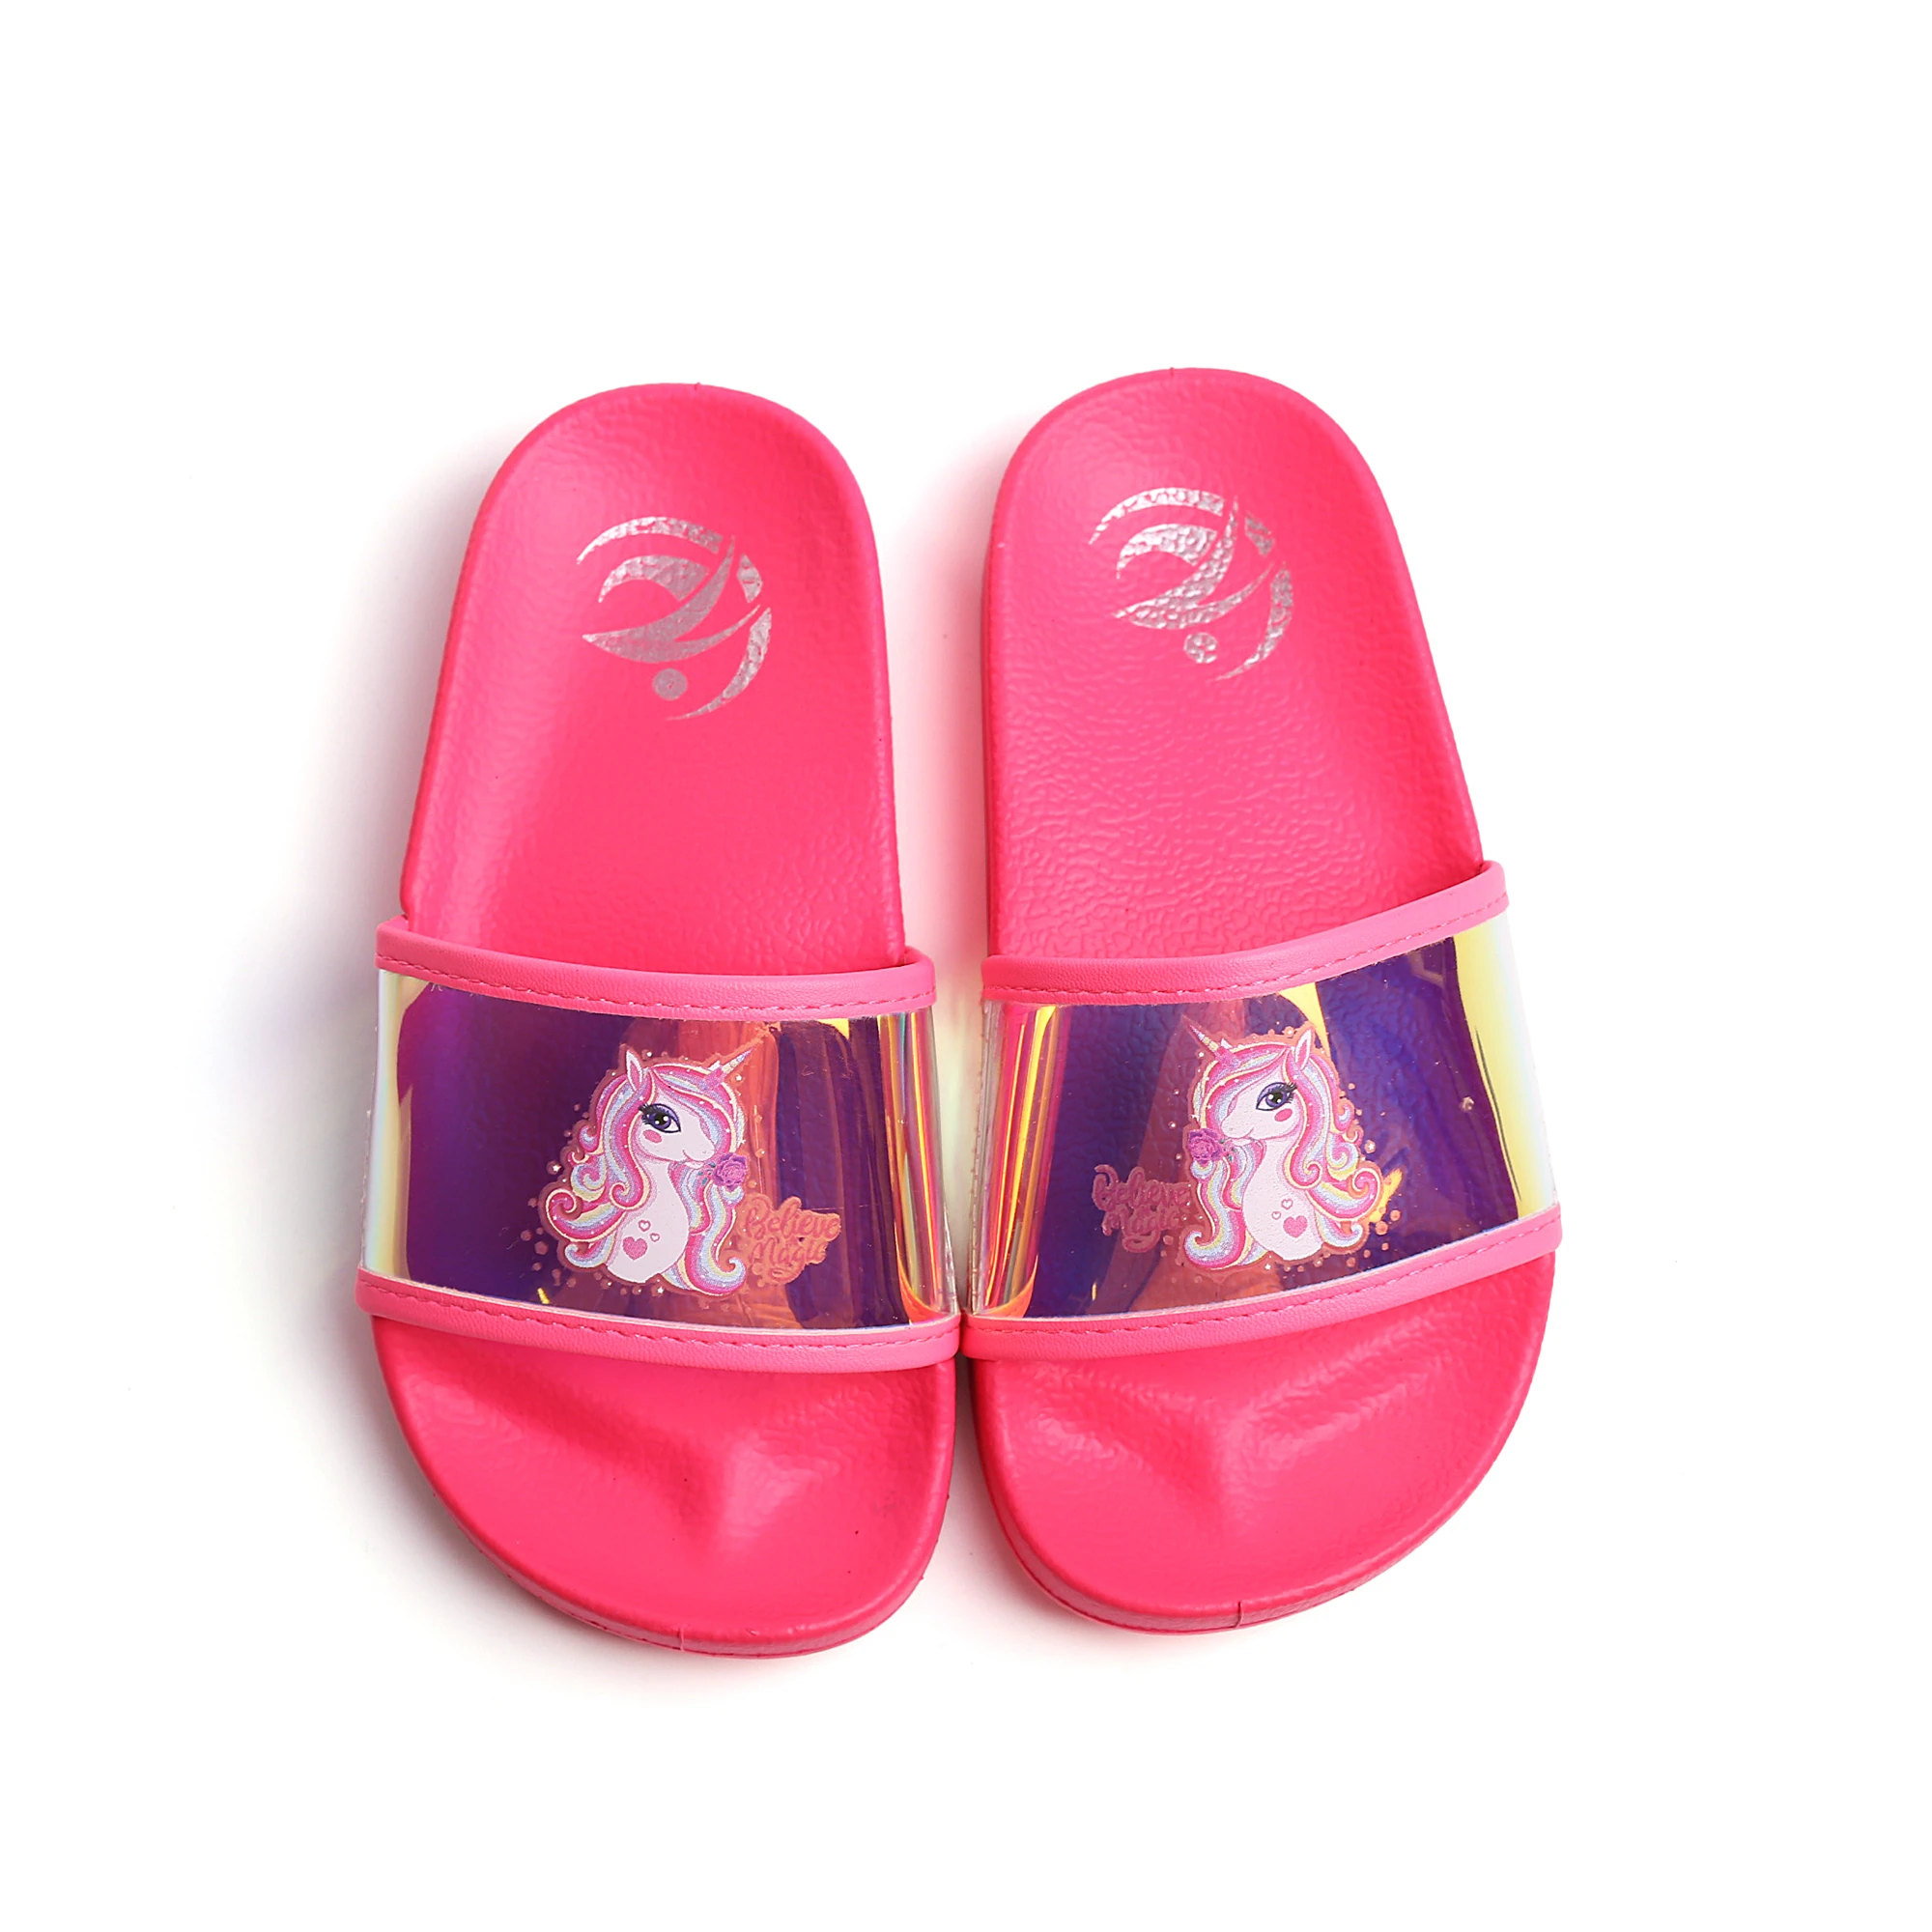 

Footwear PVC toddler shoes indoor outdoor anti-skid 3-14Y unicorn children shoes bling rainbow girlsboys slides OEM slipper, As picture or customized color